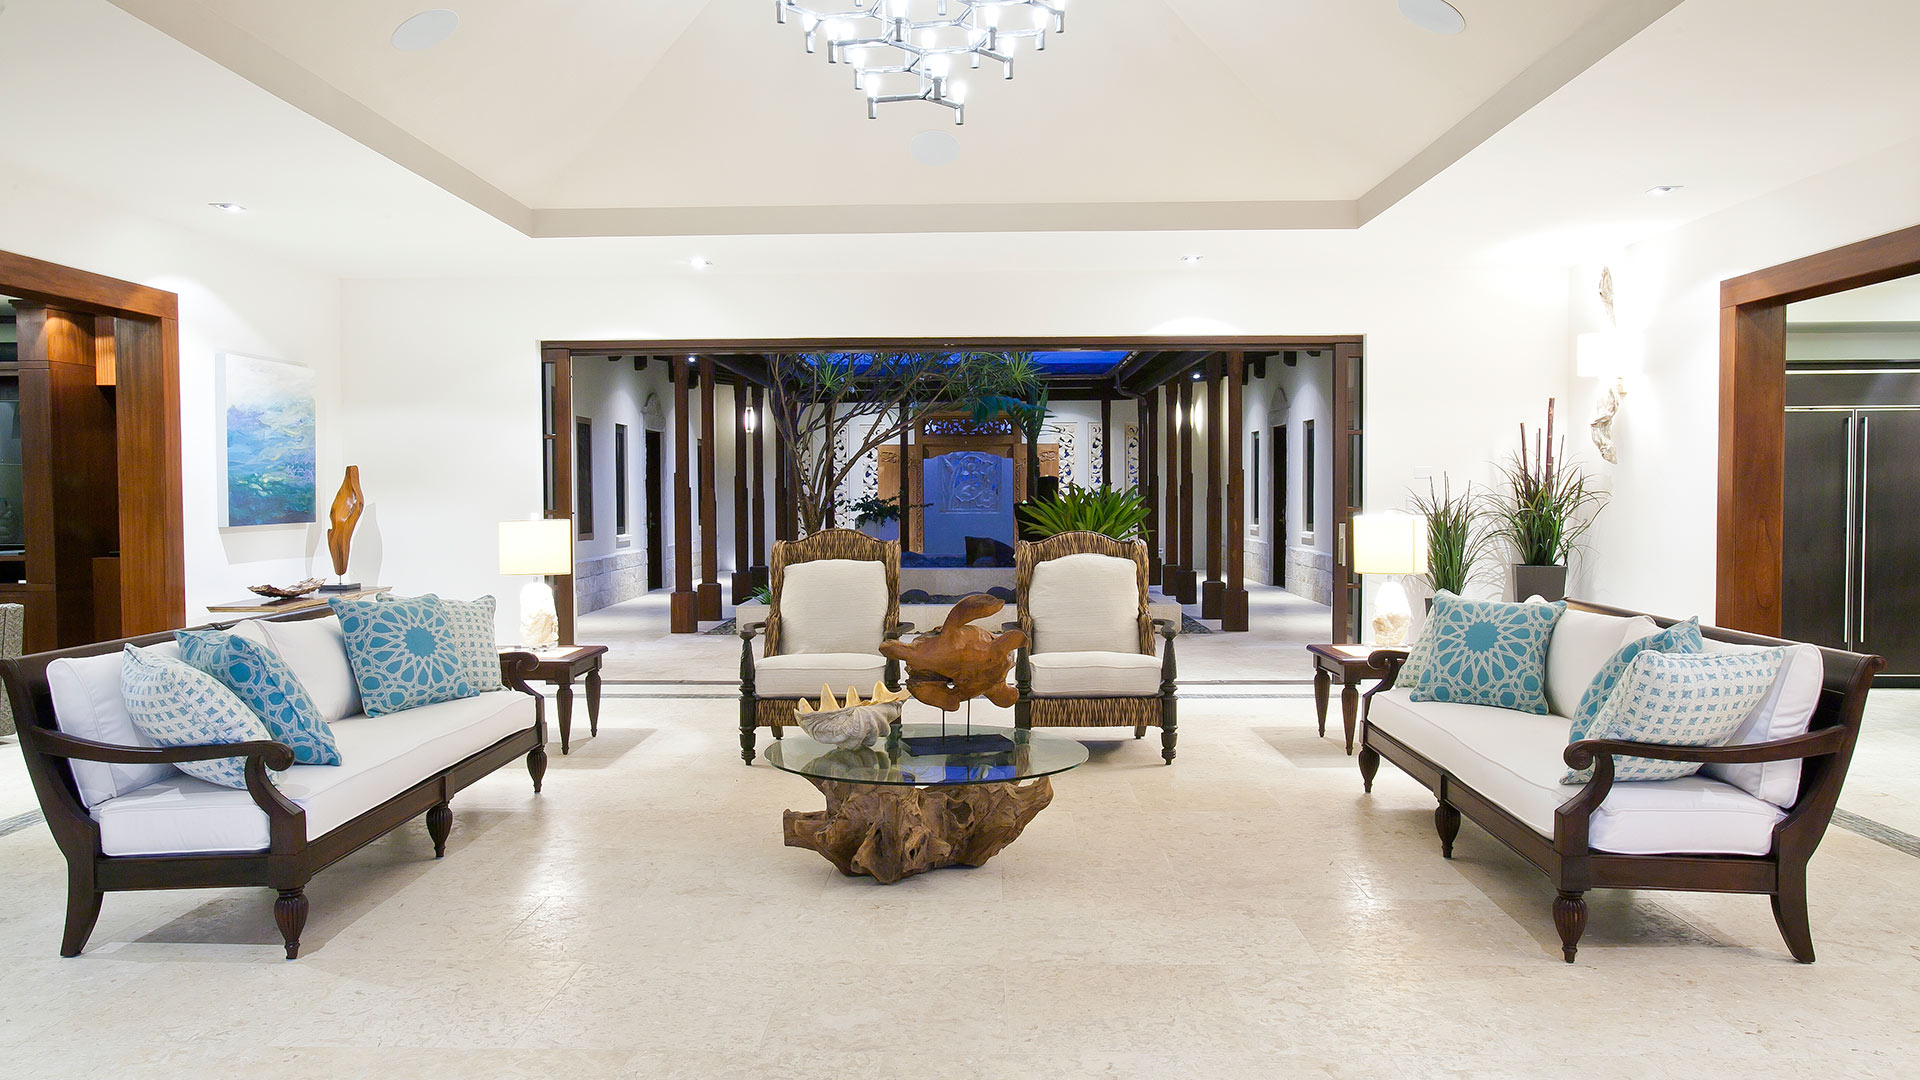 The living room offers ample seating to relax and catch a break from the Anguilla sun